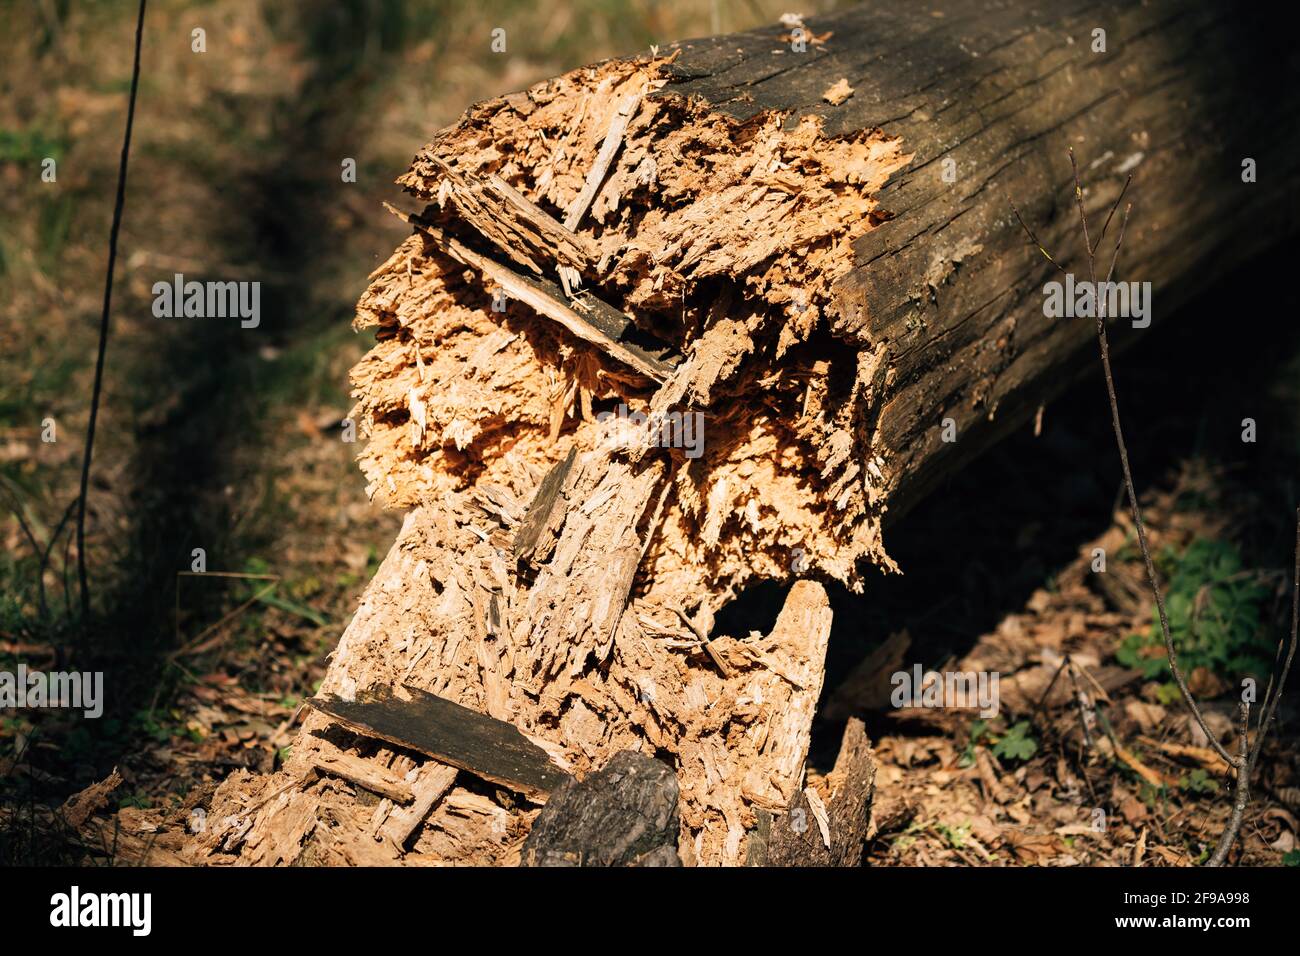 Fallen Old Pine Tree Trunk. Windfall In Forest. Storm Damage. Fallen Tree In Coniferous Forest After Strong Hurricane Wind. Stock Photo